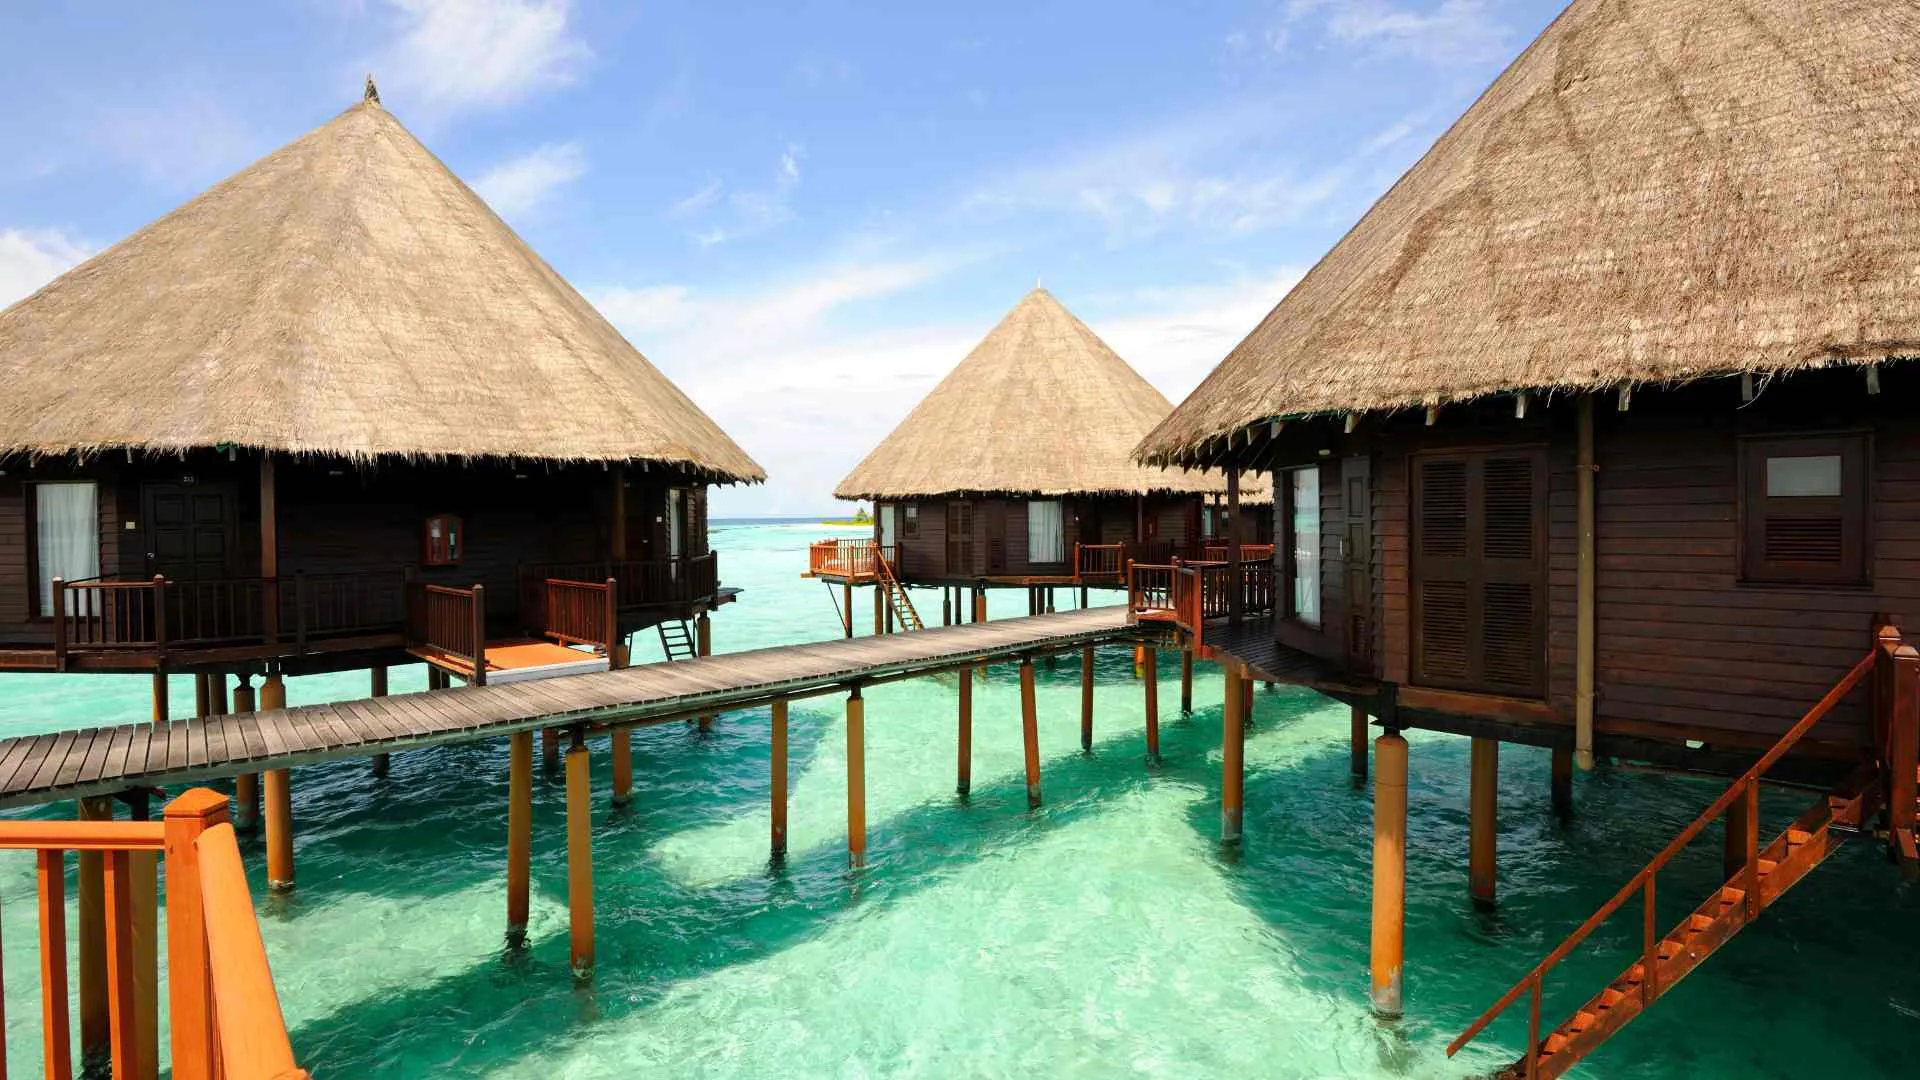 overwater bungalows caribbean